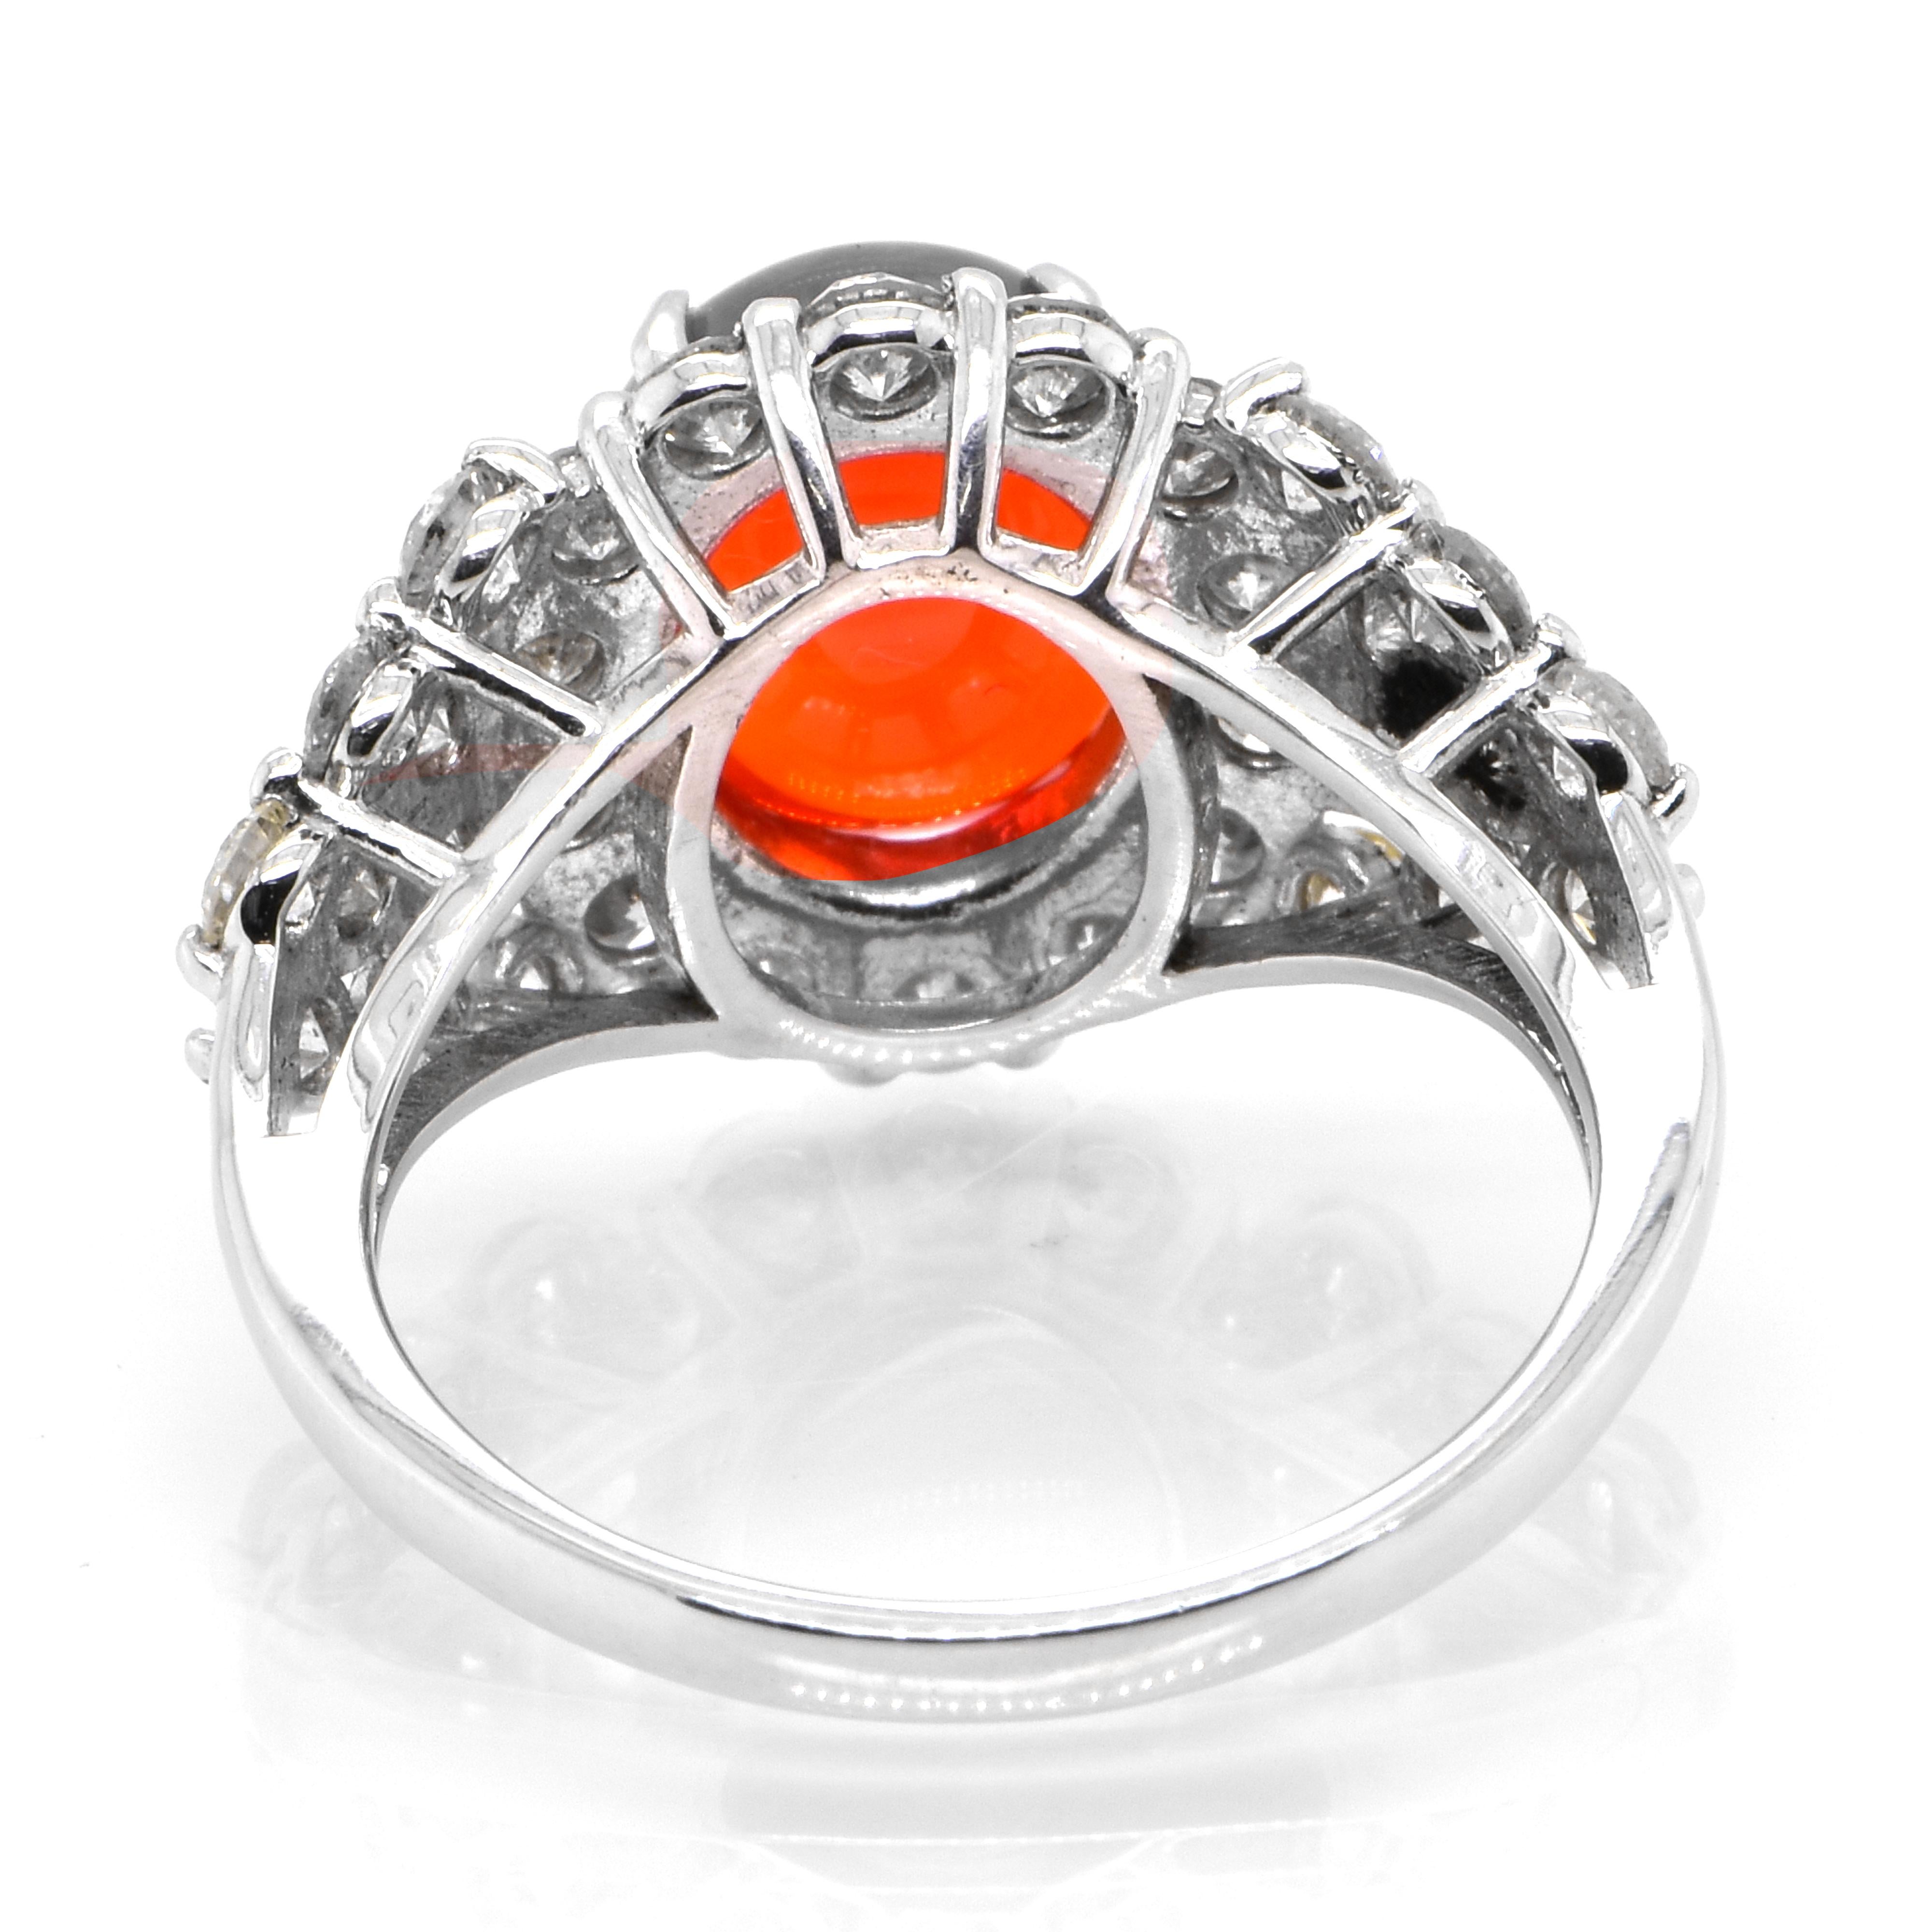 Women's 2.36 Carat Natural Mexican Fire Opal and Diamond Cocktail Ring Set in Platinum For Sale